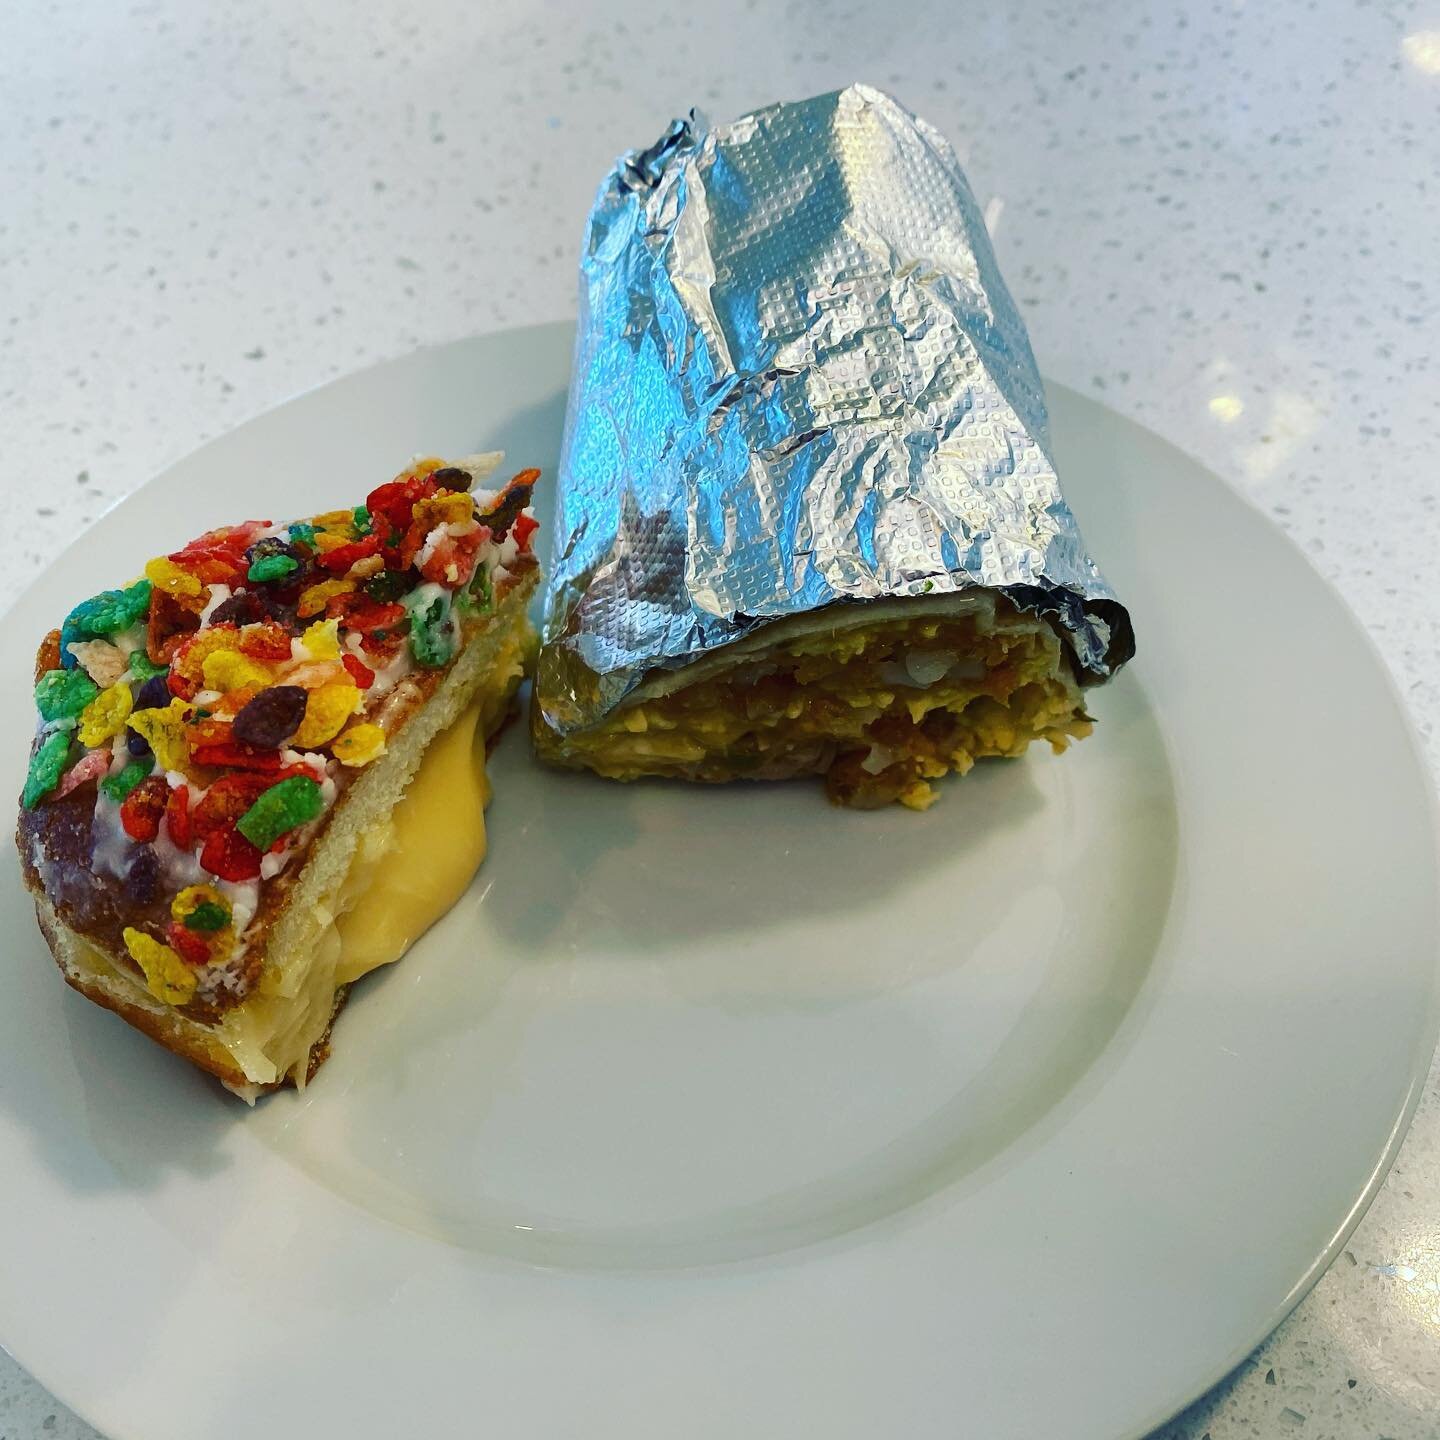 Friday delivery perks: @blackbellyco butcher&rsquo;s burrito and fruity pebble donut. #yesplease #lifeonthefarm #colorado #eatlocal